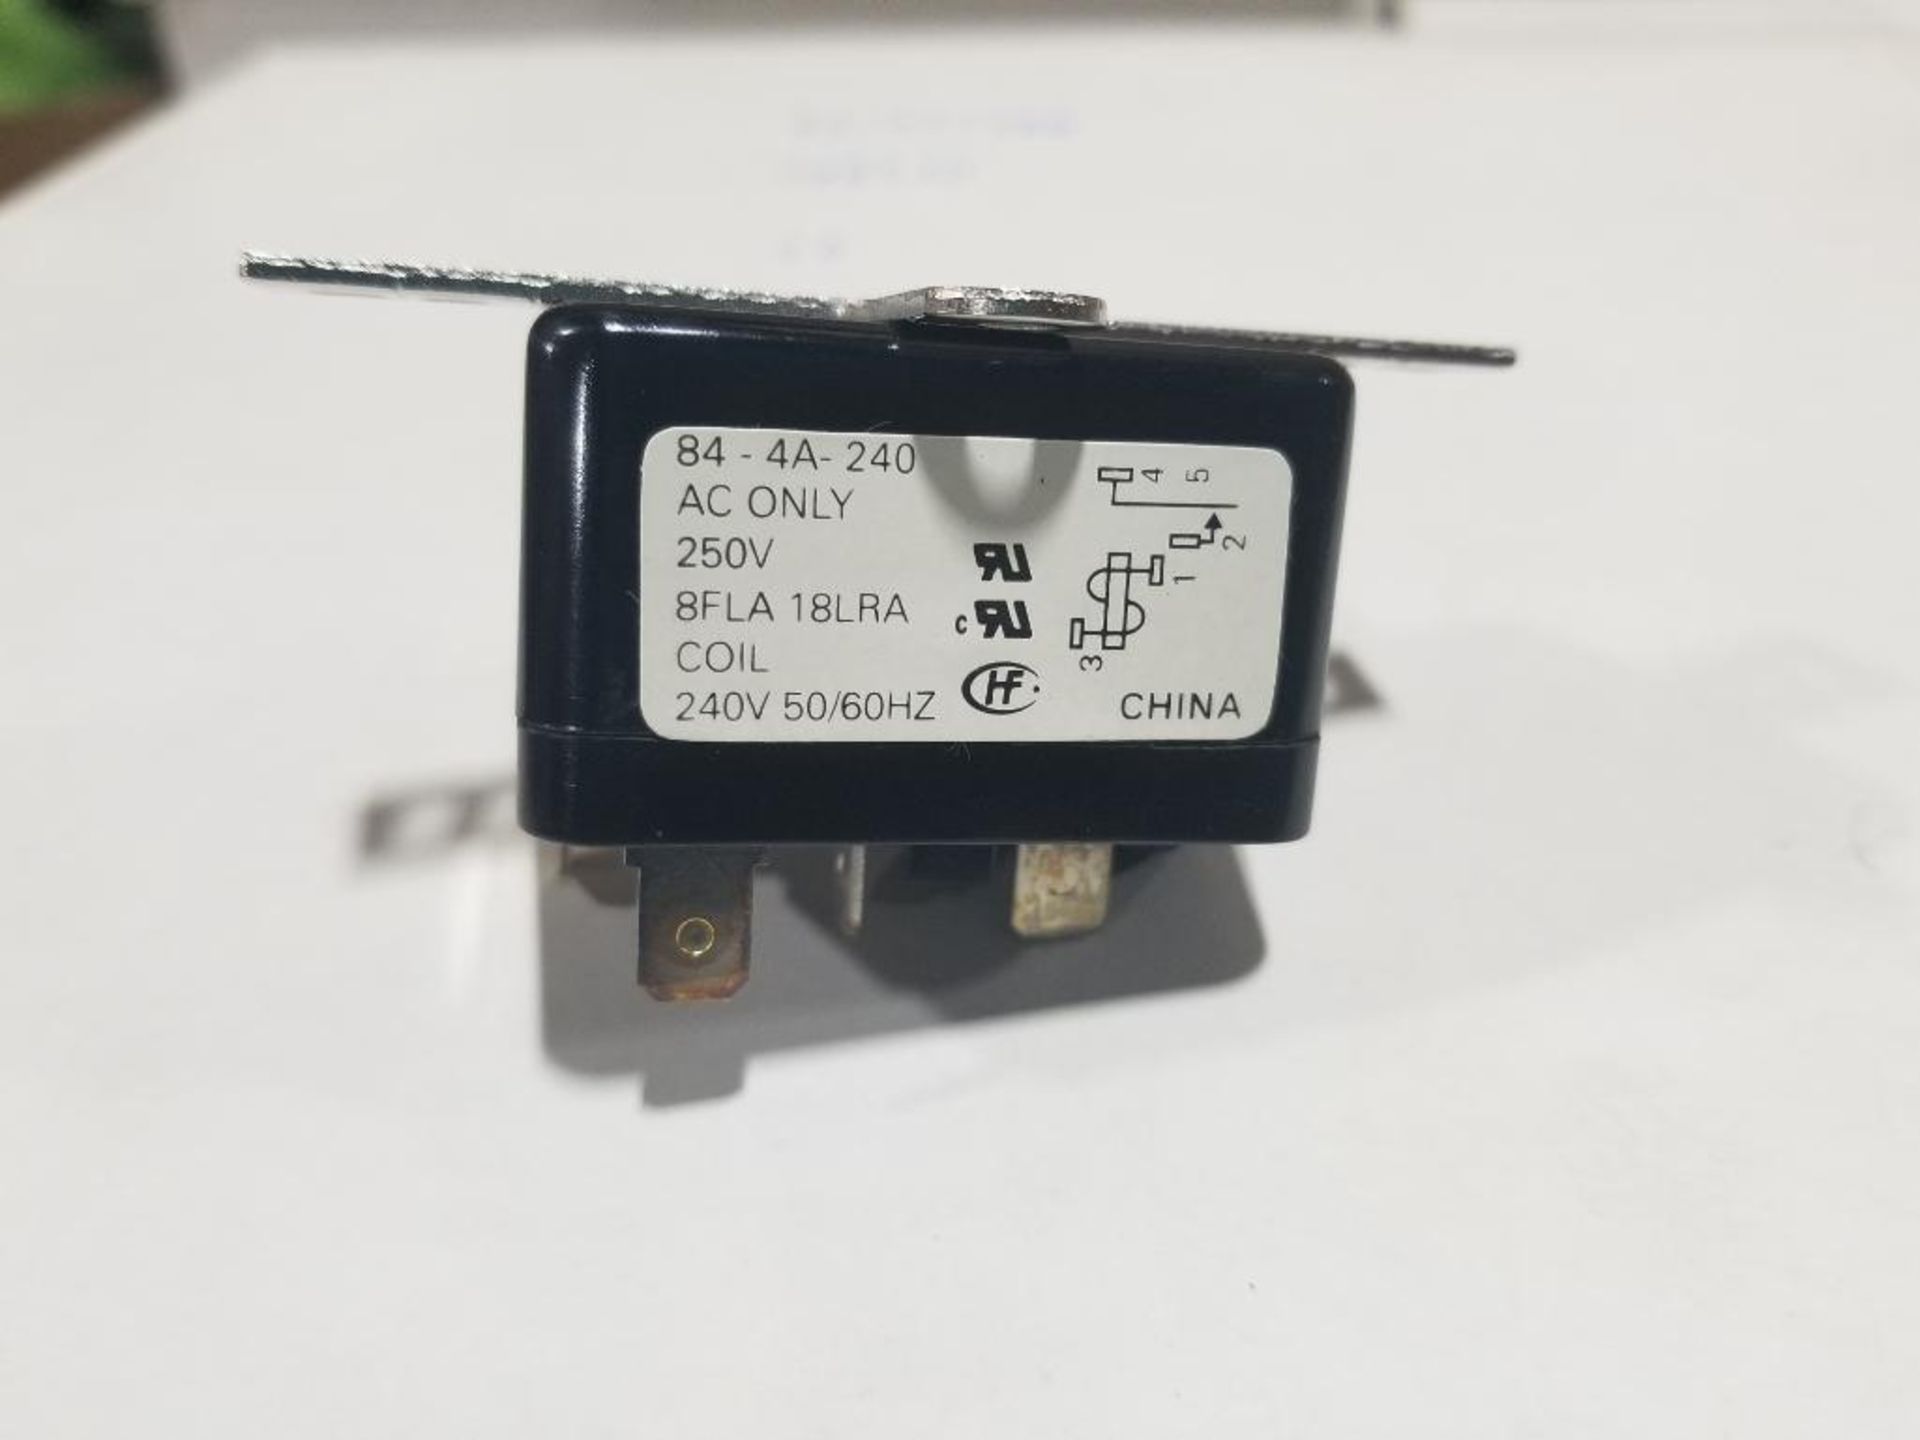 Qty 375 - Coil switch. Part number 84-4A-240. - Image 4 of 4